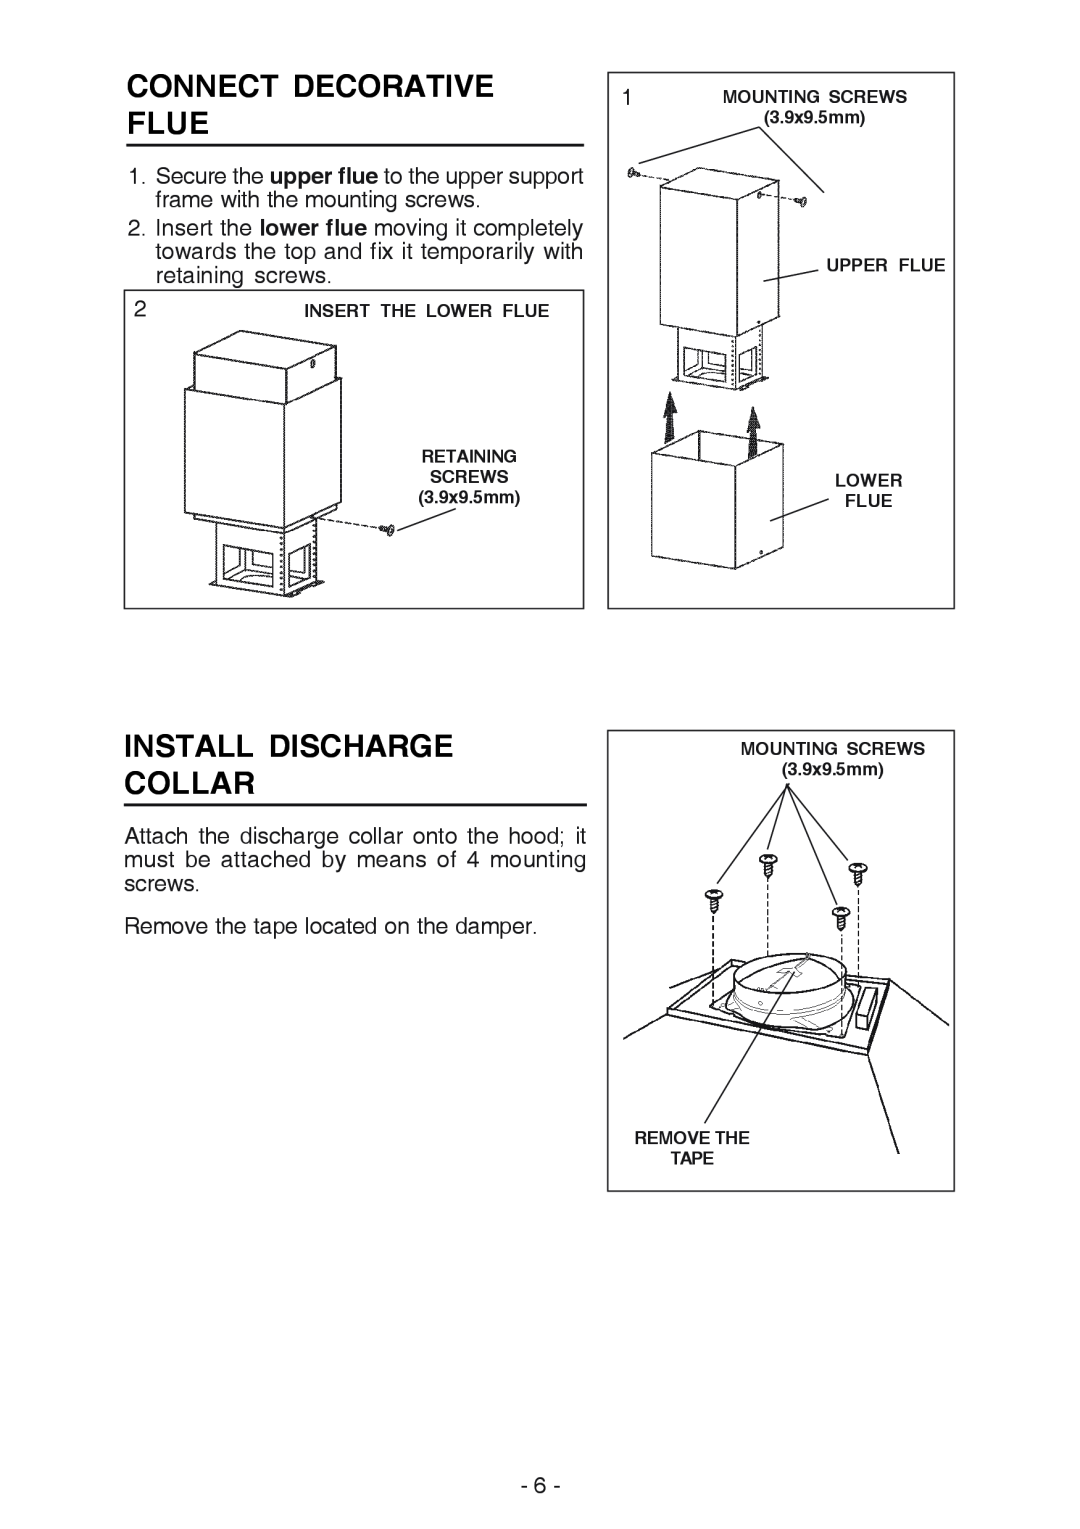 NuTone NP63000 manual Connect Decorative Flue, Install Discharge Collar 